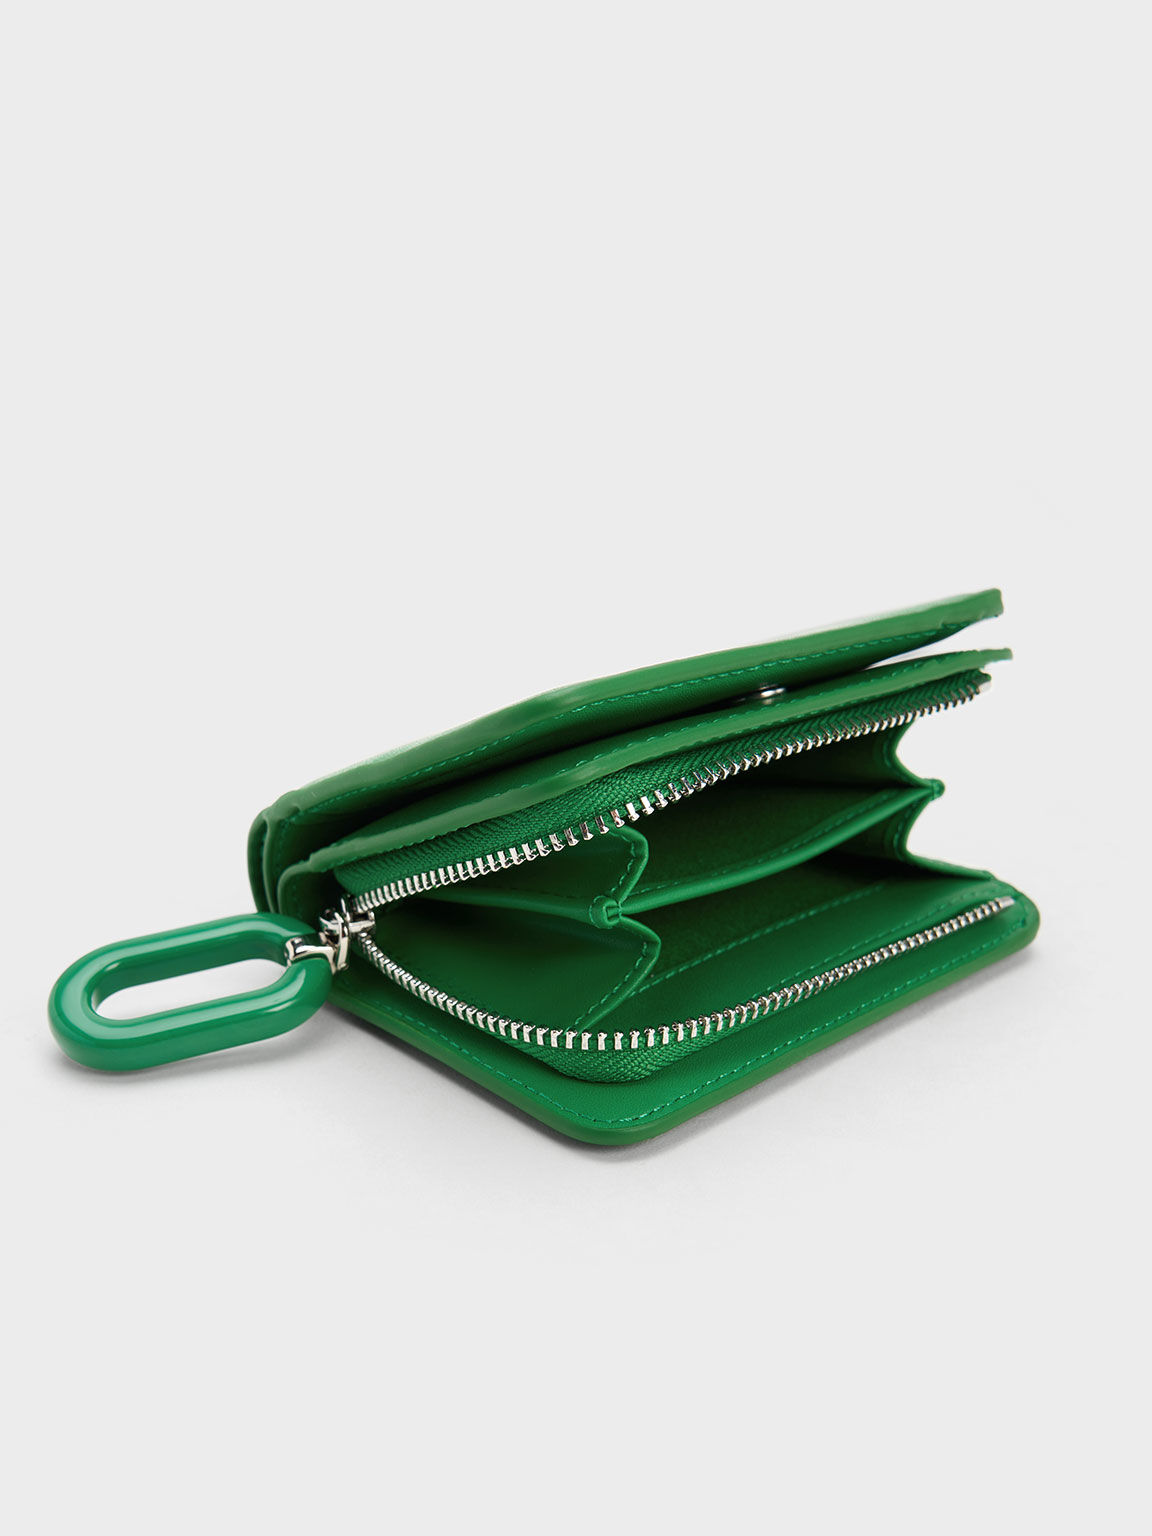 Pre-Owned Kate Spade Audrey Turnlock Wallet Women's Trifold Leather Green  (Good) - Walmart.com